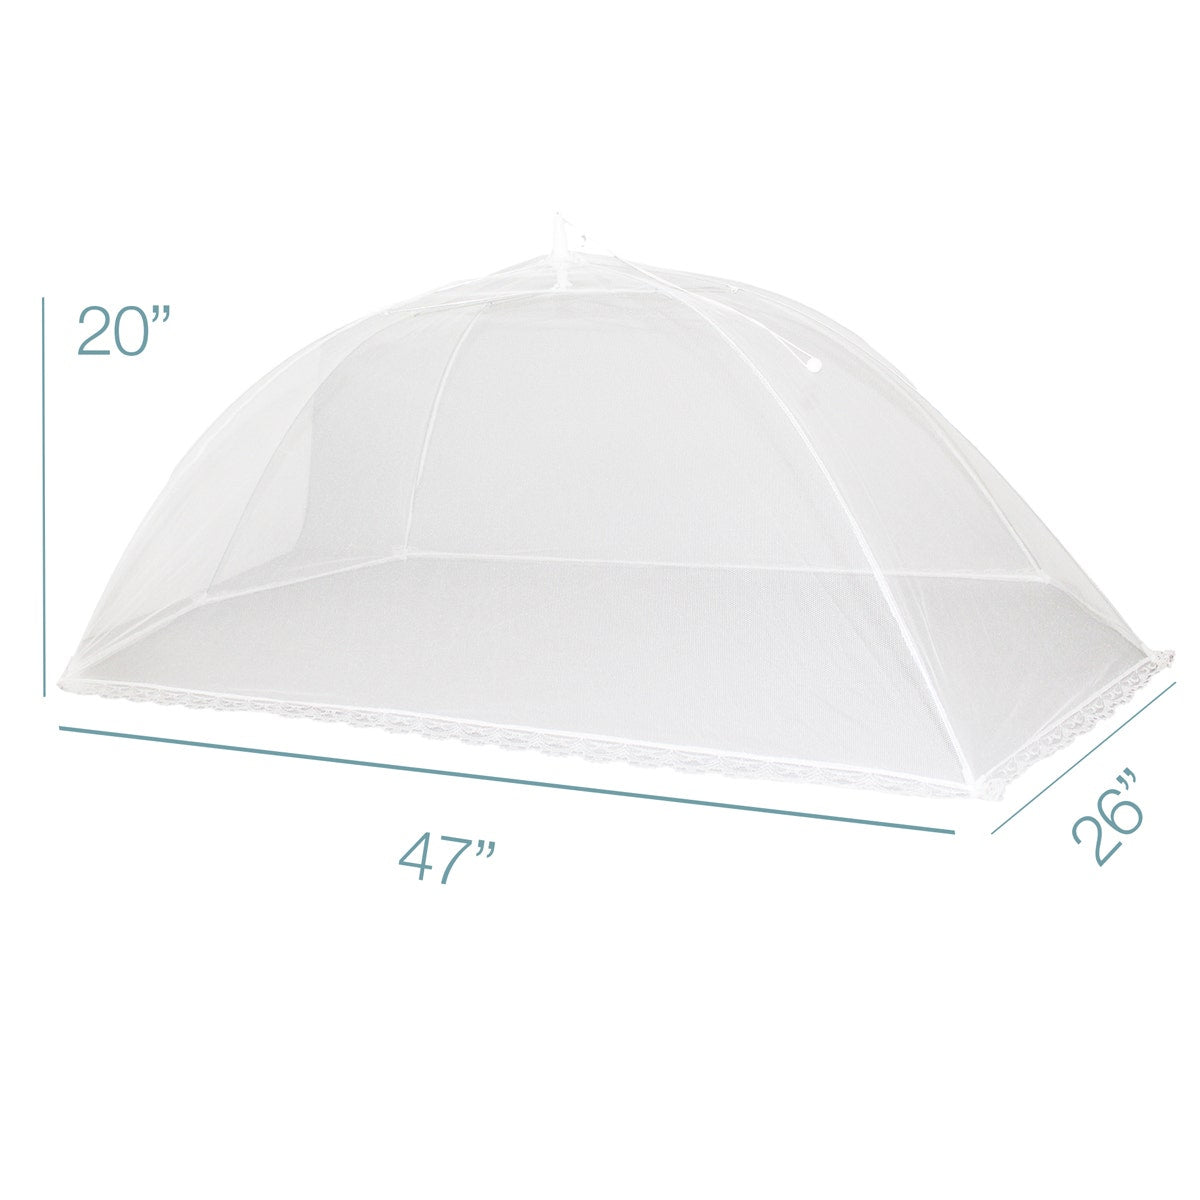 2pk Simply Genius Pop-Up Outdoor Mesh Food Tent Covers Large